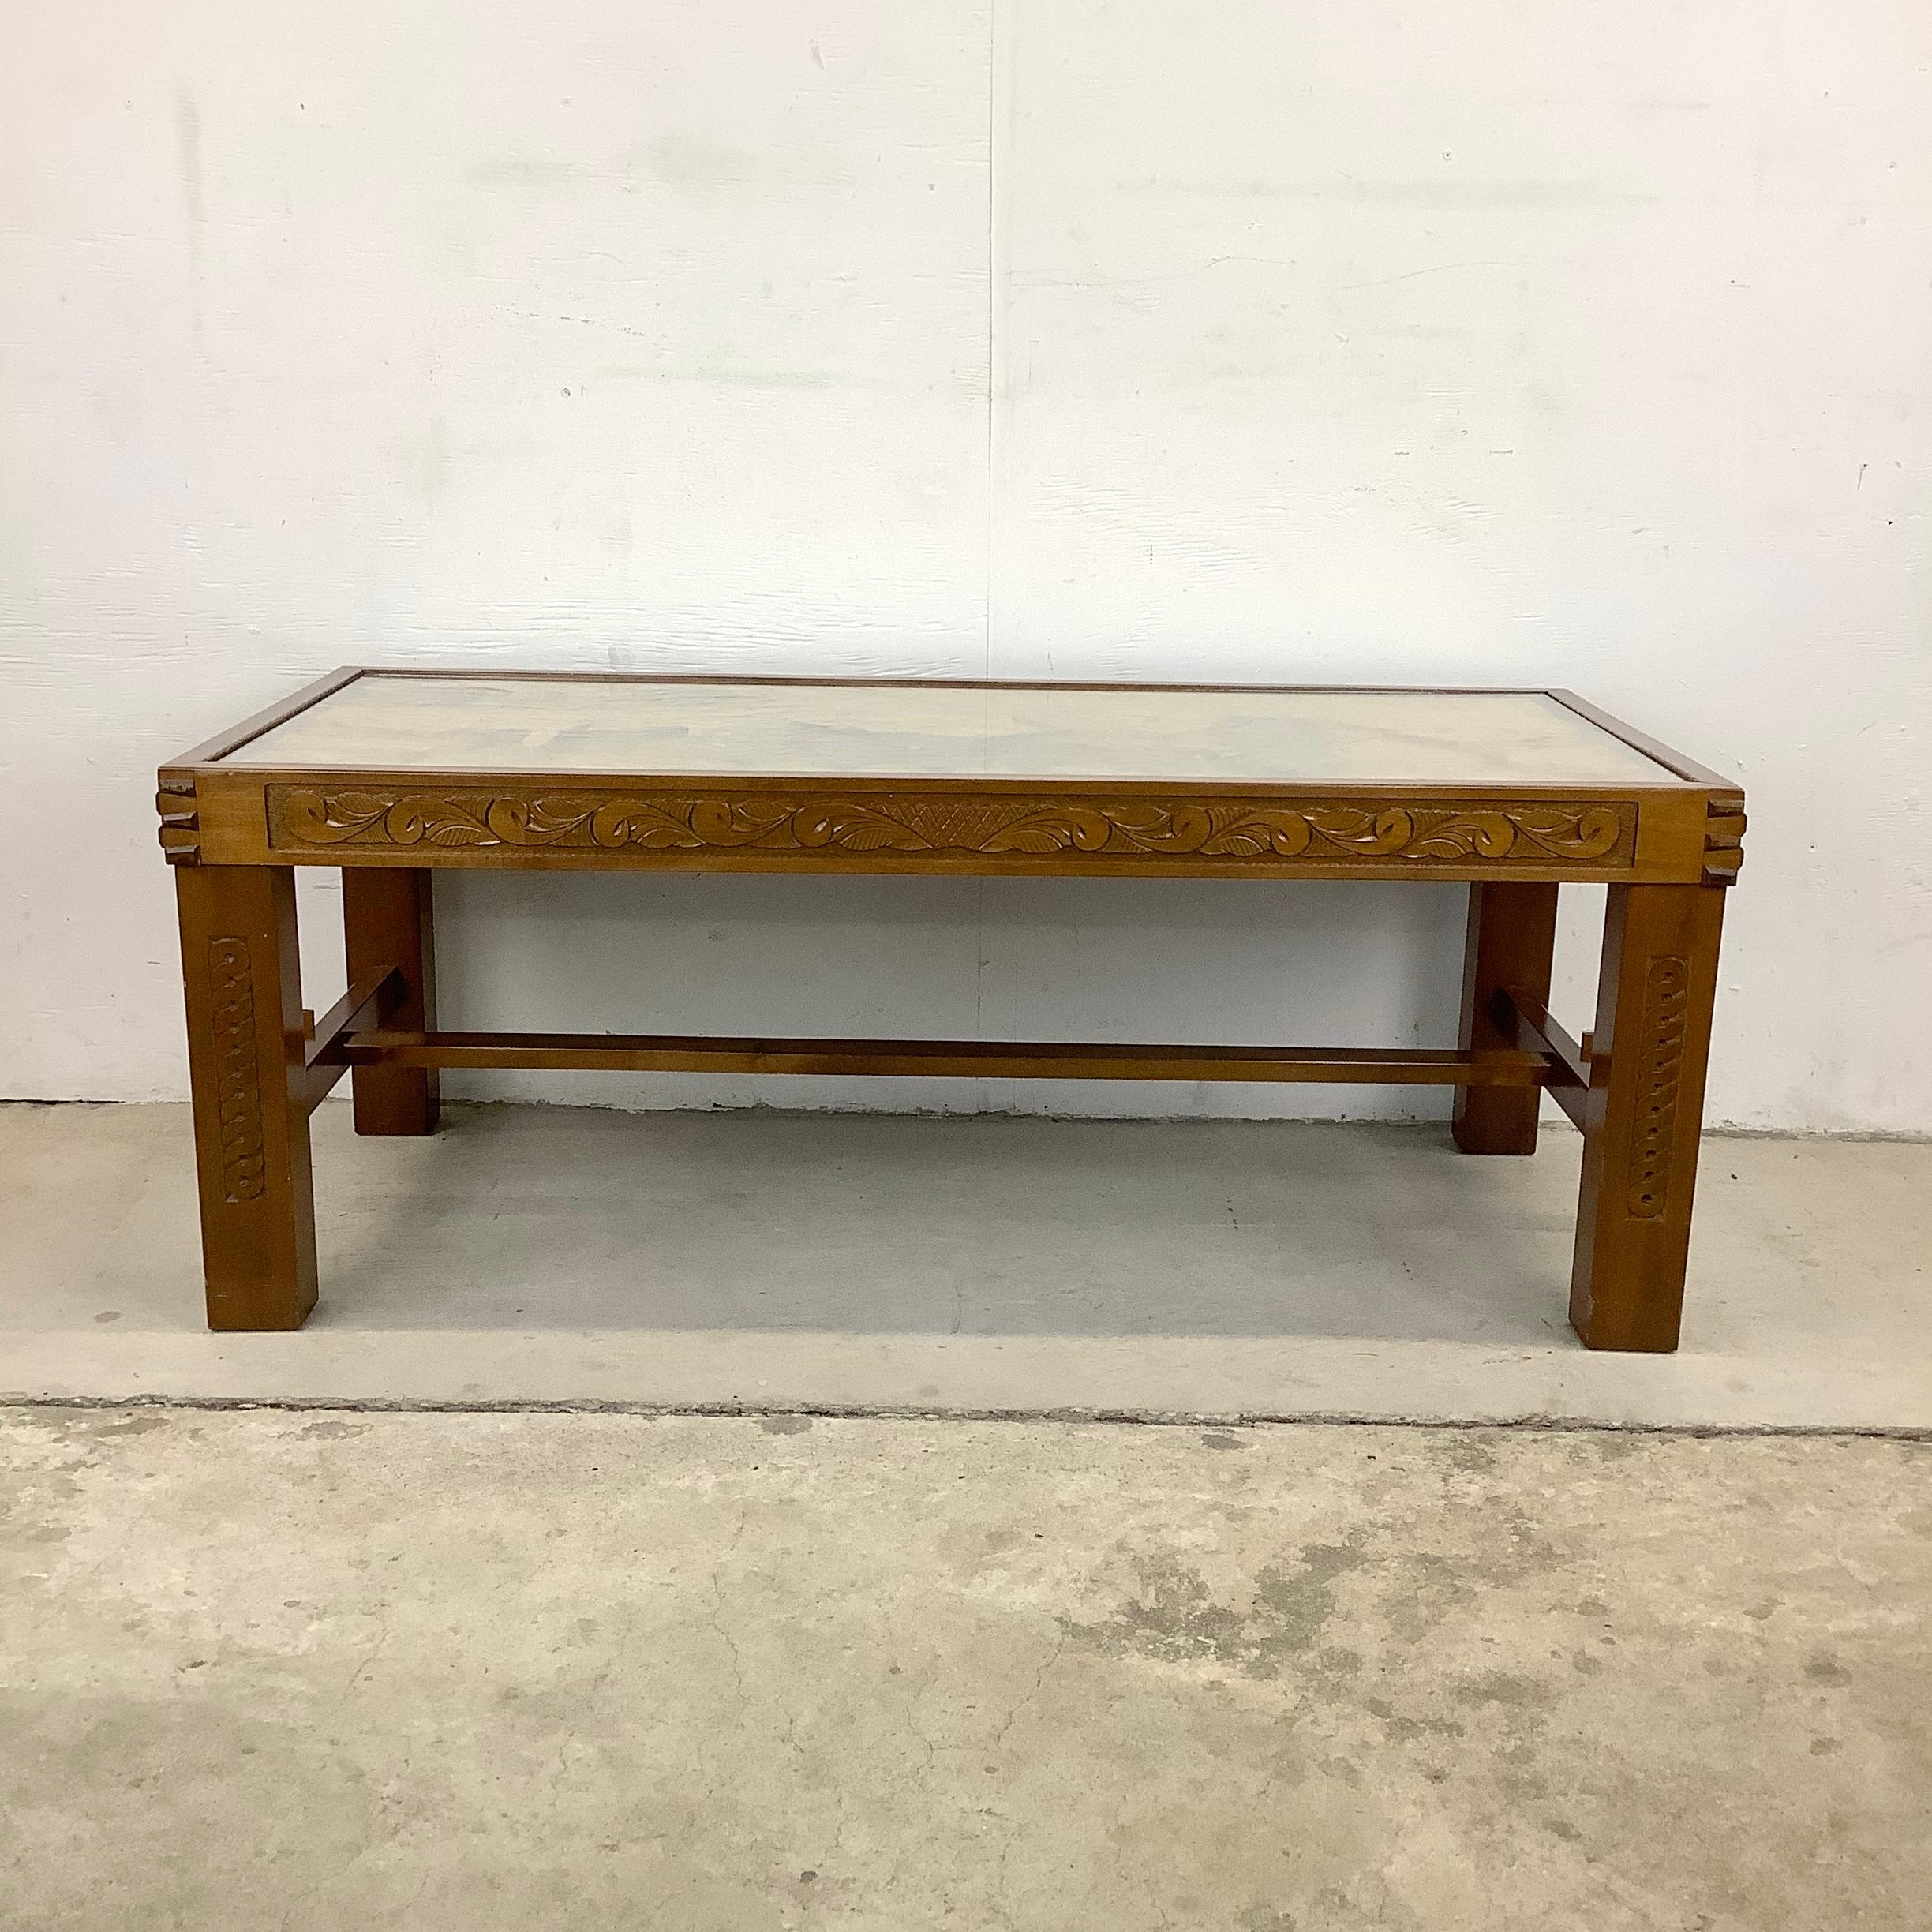 This unique illustrator style vintage coffee table features hand carved wooden table with glass top- charming country style carved scene makes an interesting centerpiece to any seating area.

Dimensions: 47w 21.25d 18.25h

Condition: age